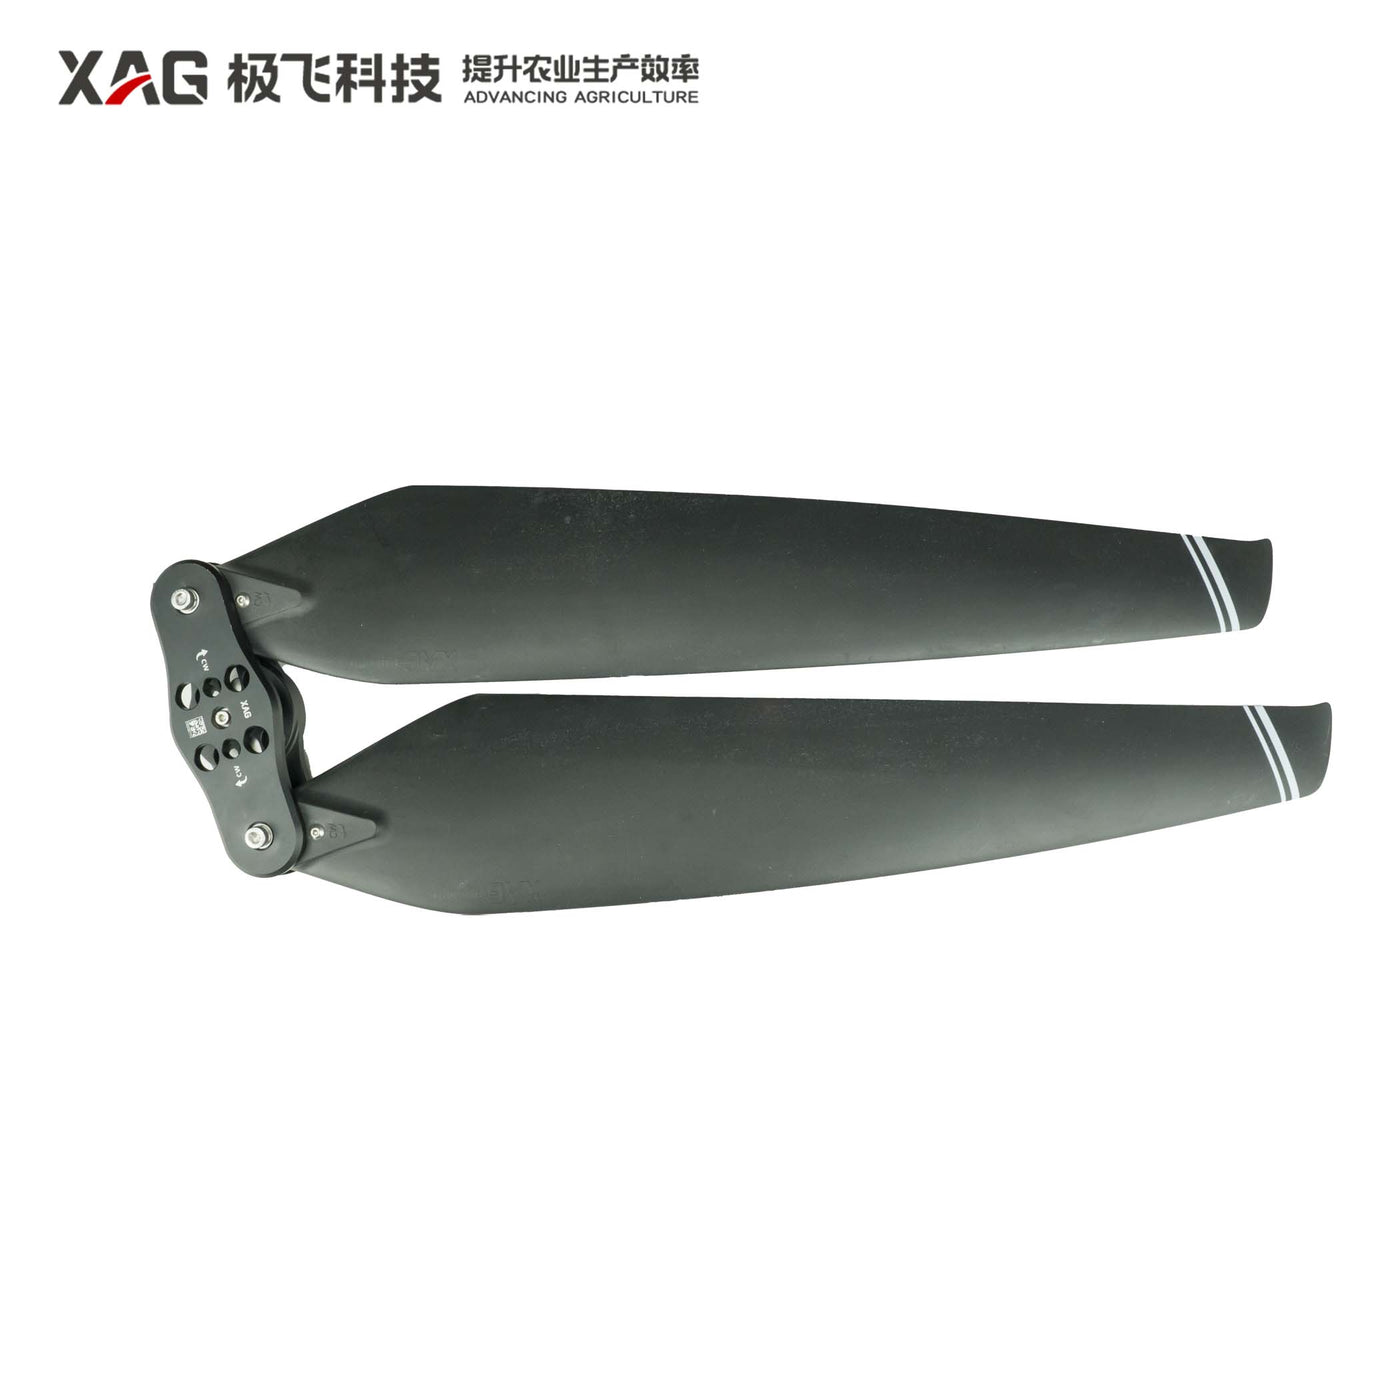 47" Foldable Propeller (for P100, Rear, CW)